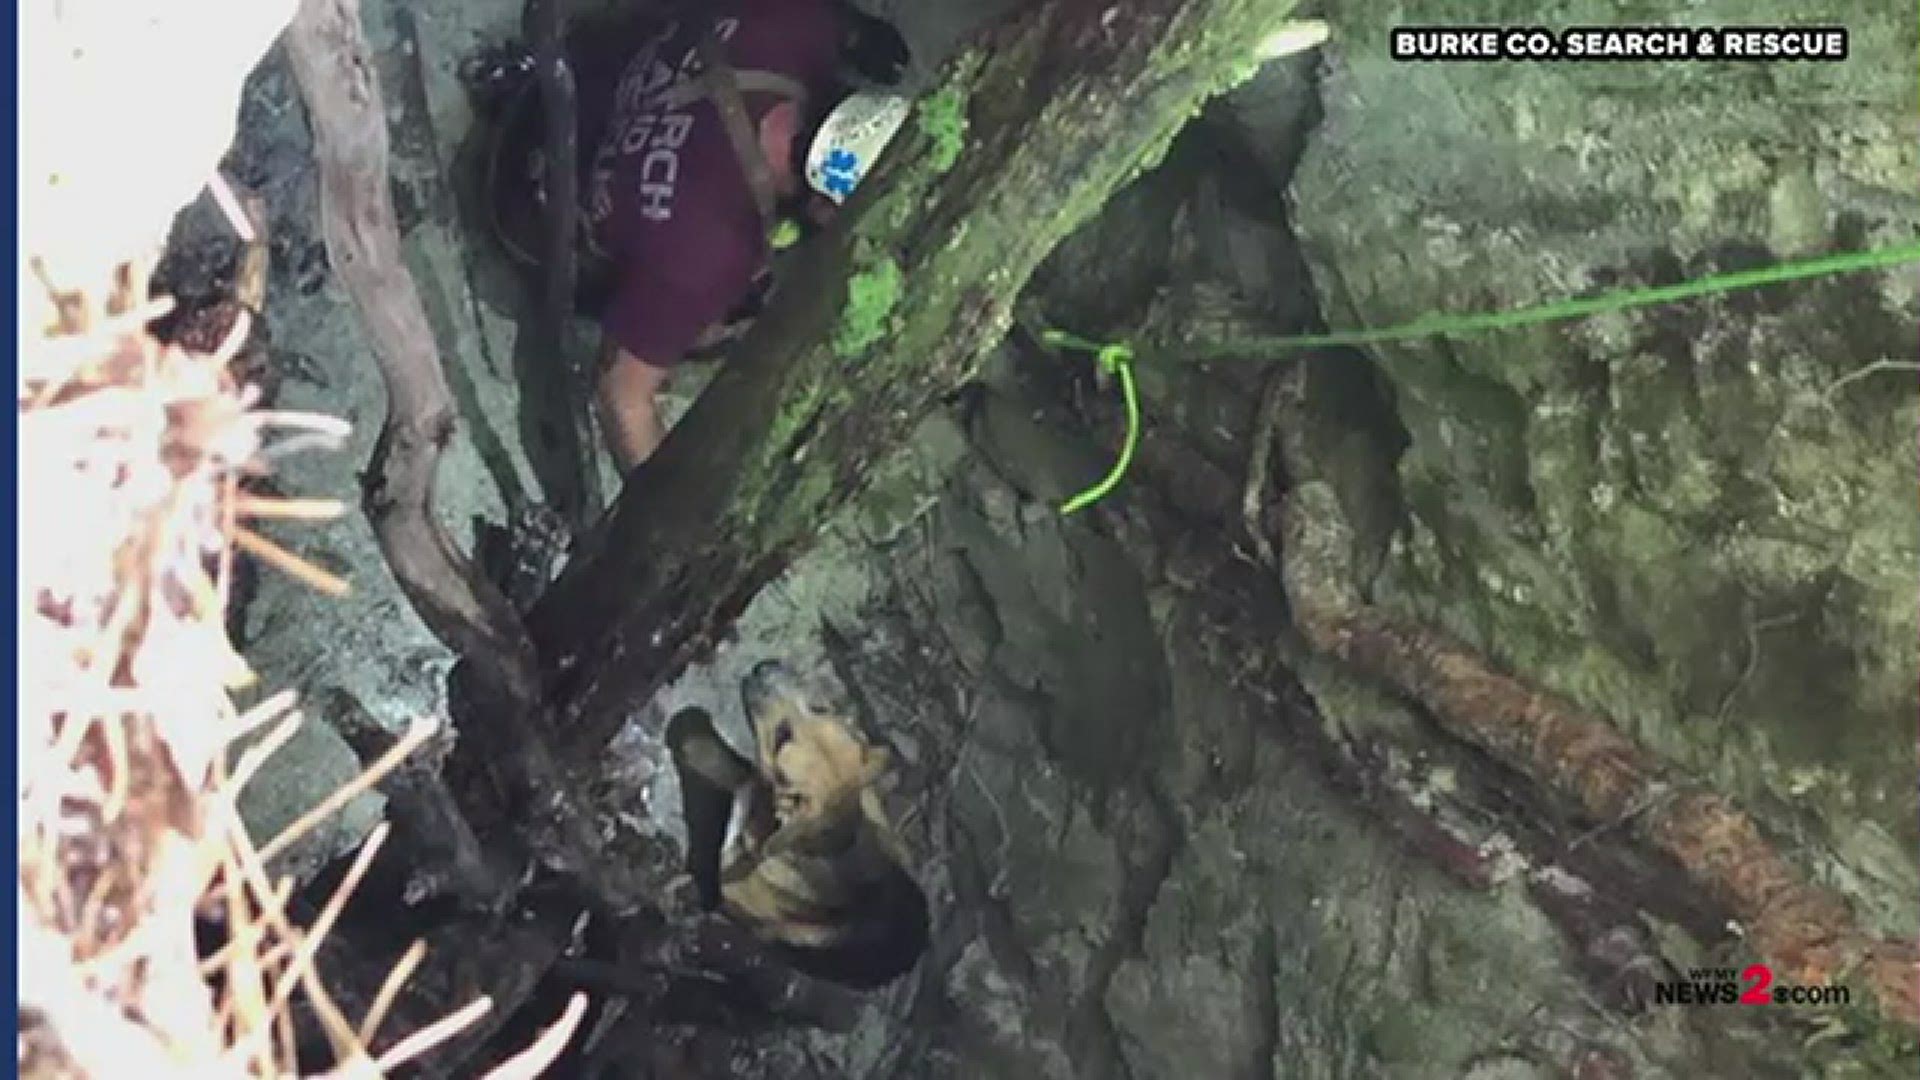 Dog rescued from inside 30-foot sinkhole in Pisgah National Forest in North Carolina.